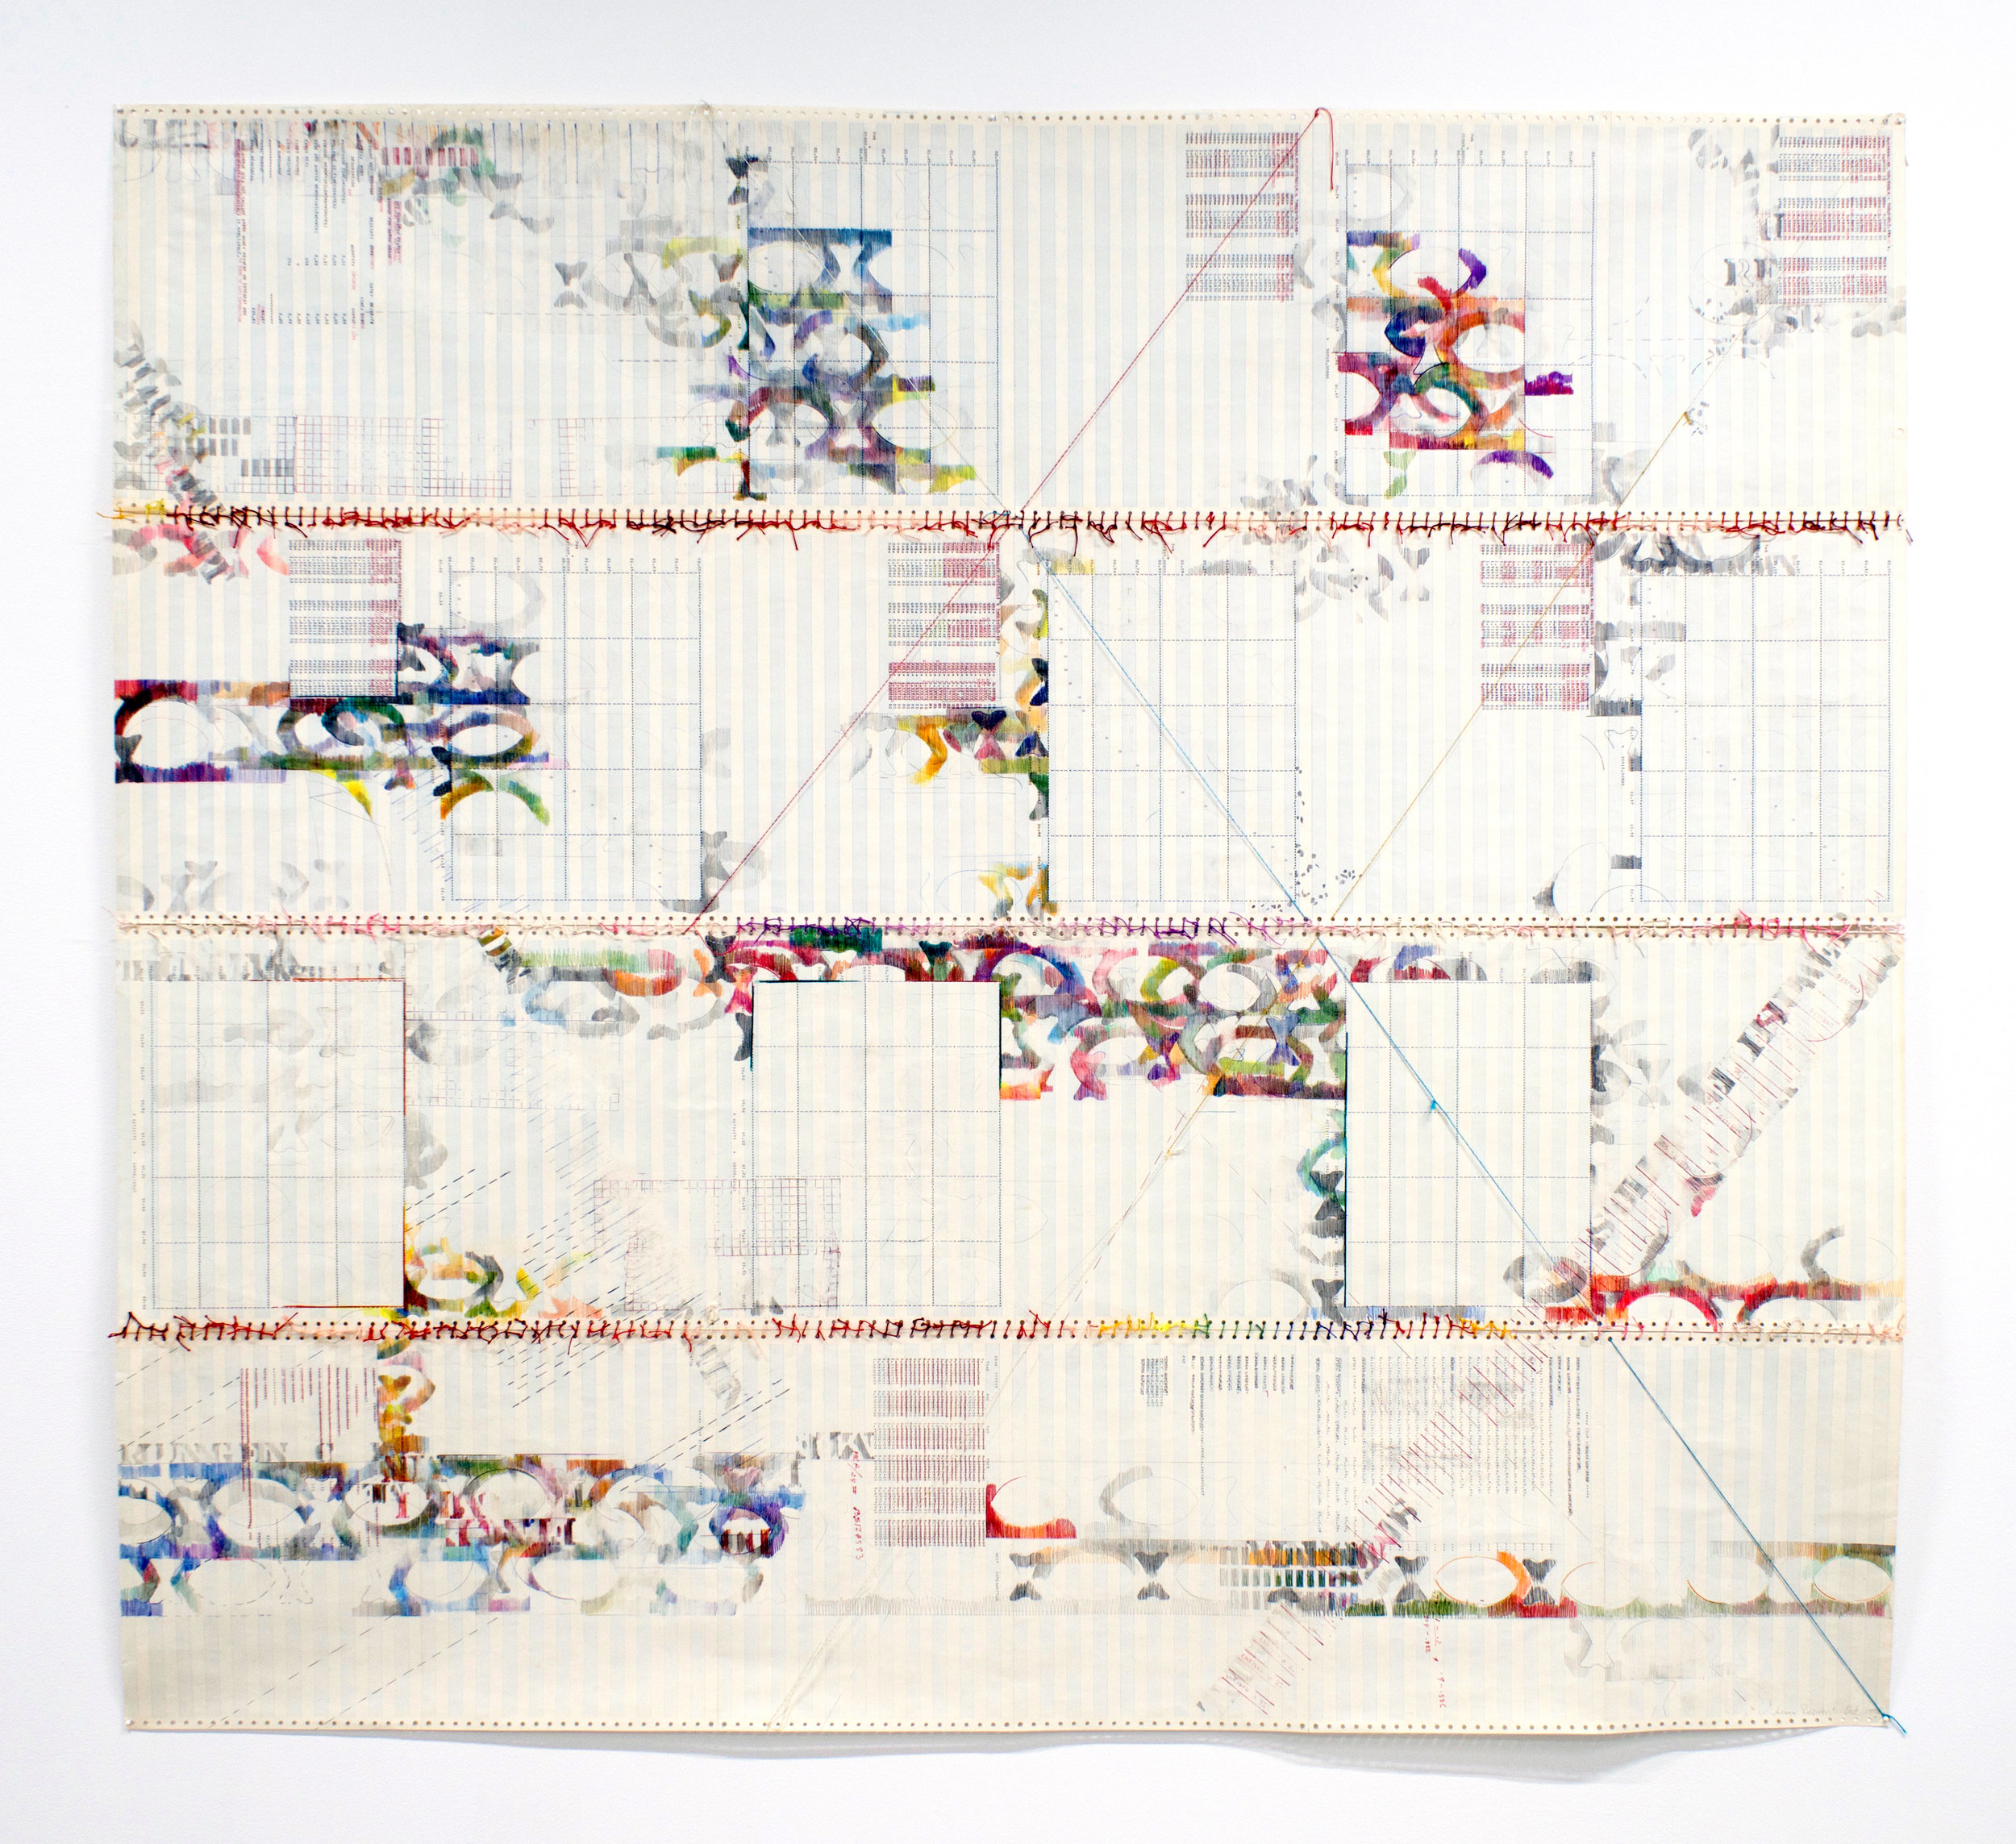   SONYA RAPOPORT   Christo and Cornell (Yarn Drawing No. 9) , 1976, pencil, colored pencil, stamp, ink and thread on found continuous-feed computer paper, 59.5" x 66" 